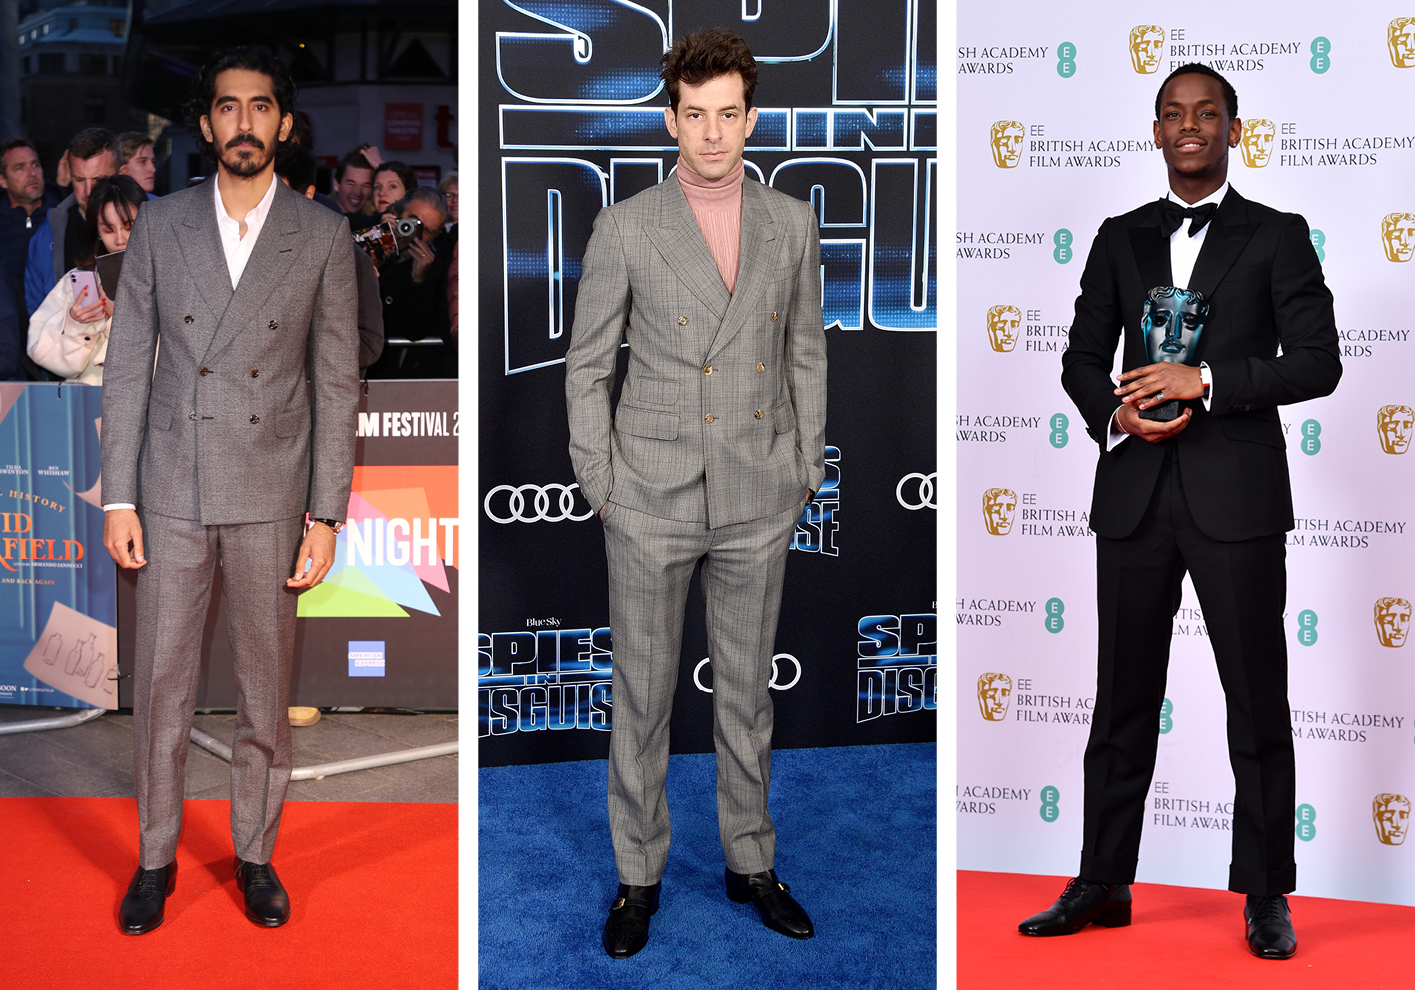 From left: Dev Patel in Gucci on the red carpet in 2019; Micheal Ward at the 2020 BAFTAs; Mark Ronson at the Spies in Disguise premiere, 2019. Image courtesy of Getty Images, Mike Marsland/WireImage